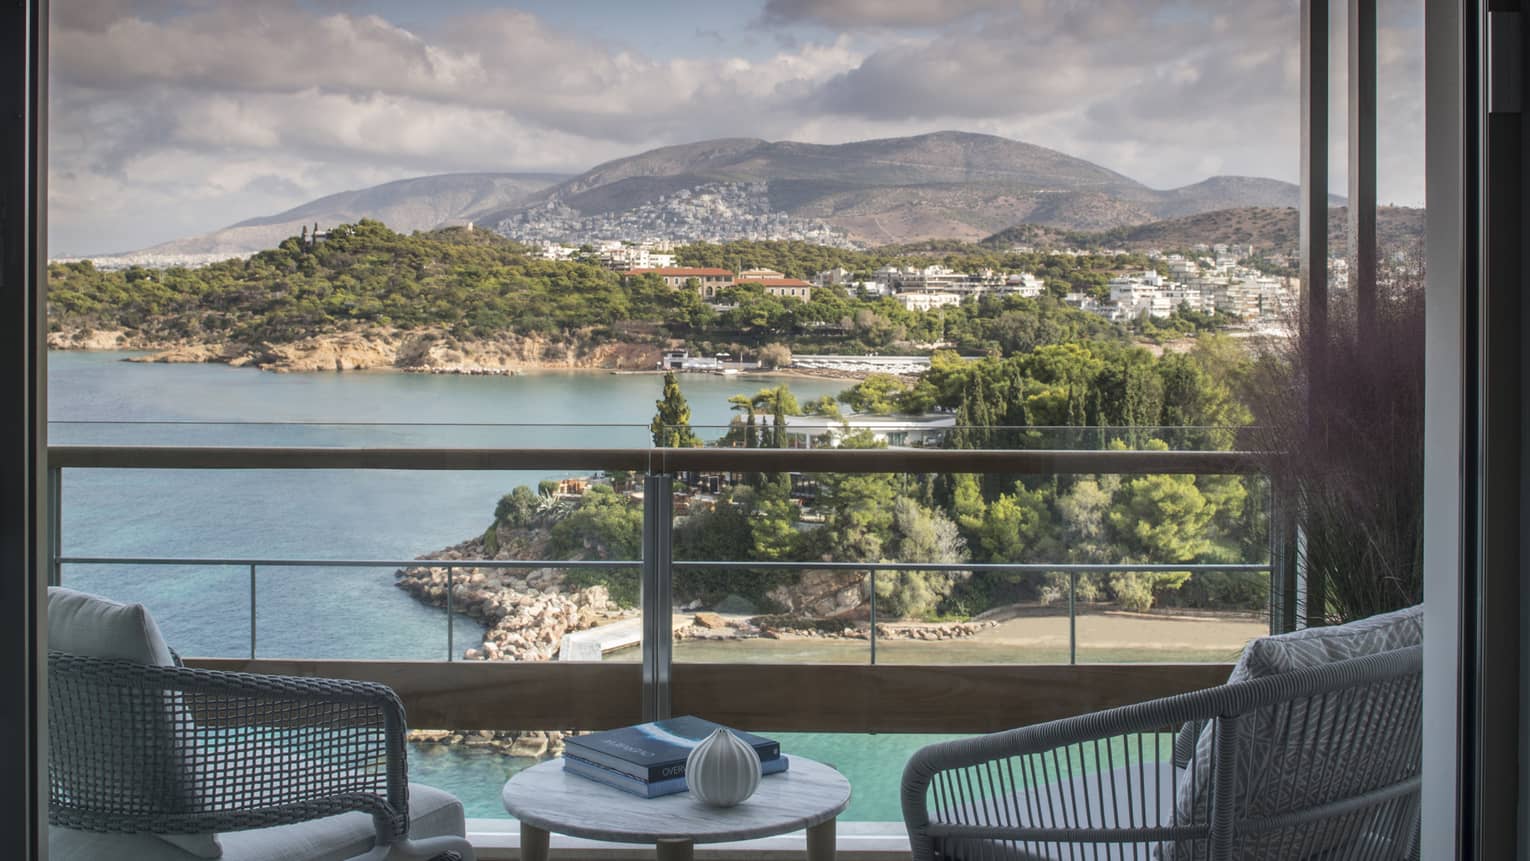 Four Seasons Astir Palace Hotel Athens balcony chairs, table with books, overlooking sea, trees, mountains